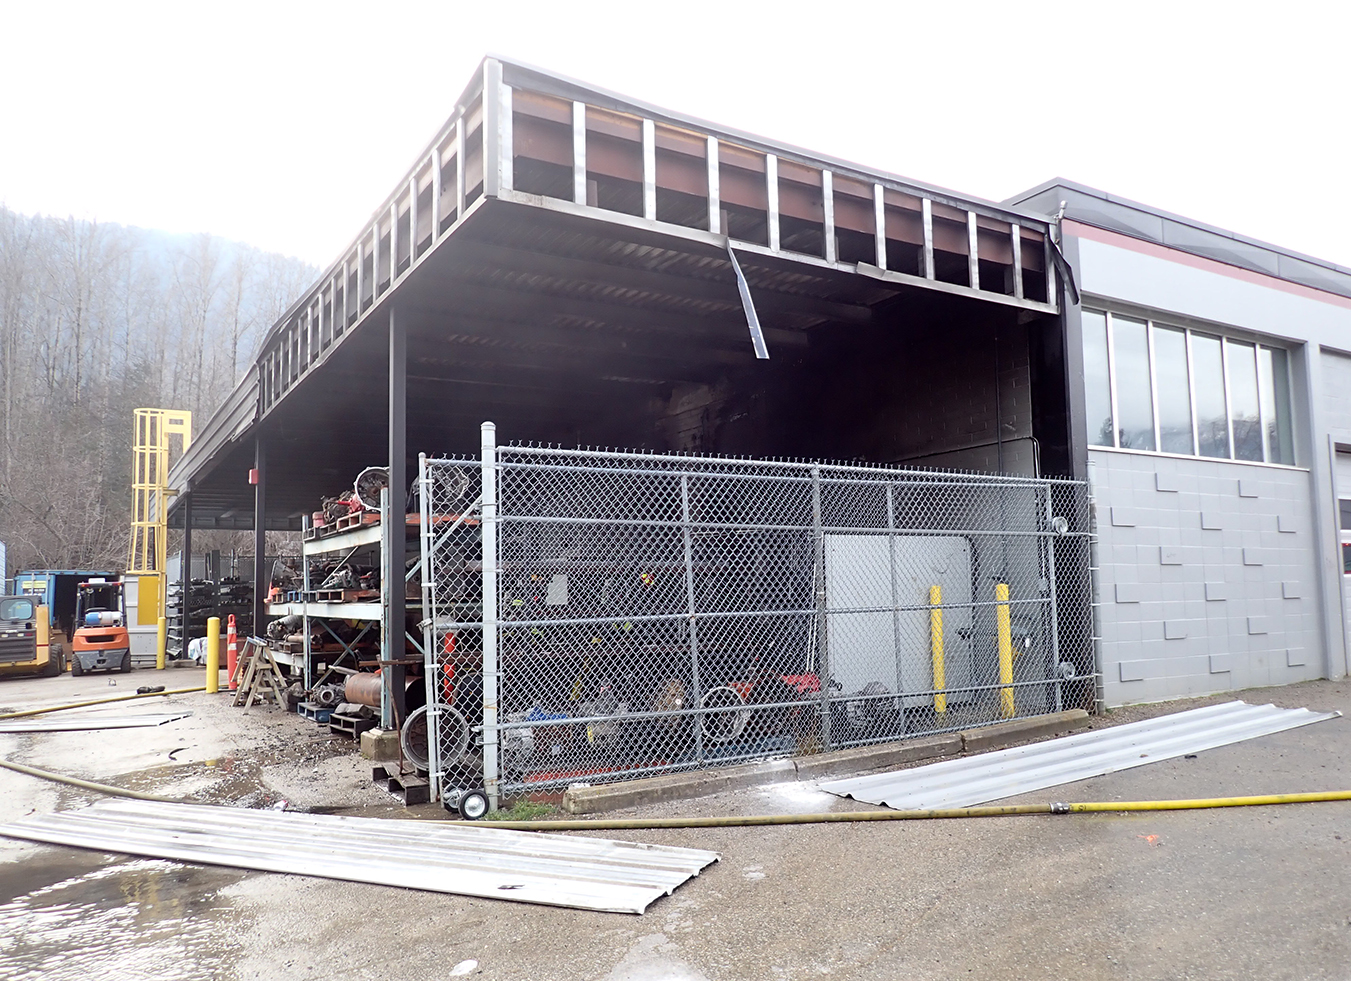 UPDATED: Cause of explosion at Selkirk College remains under investigation